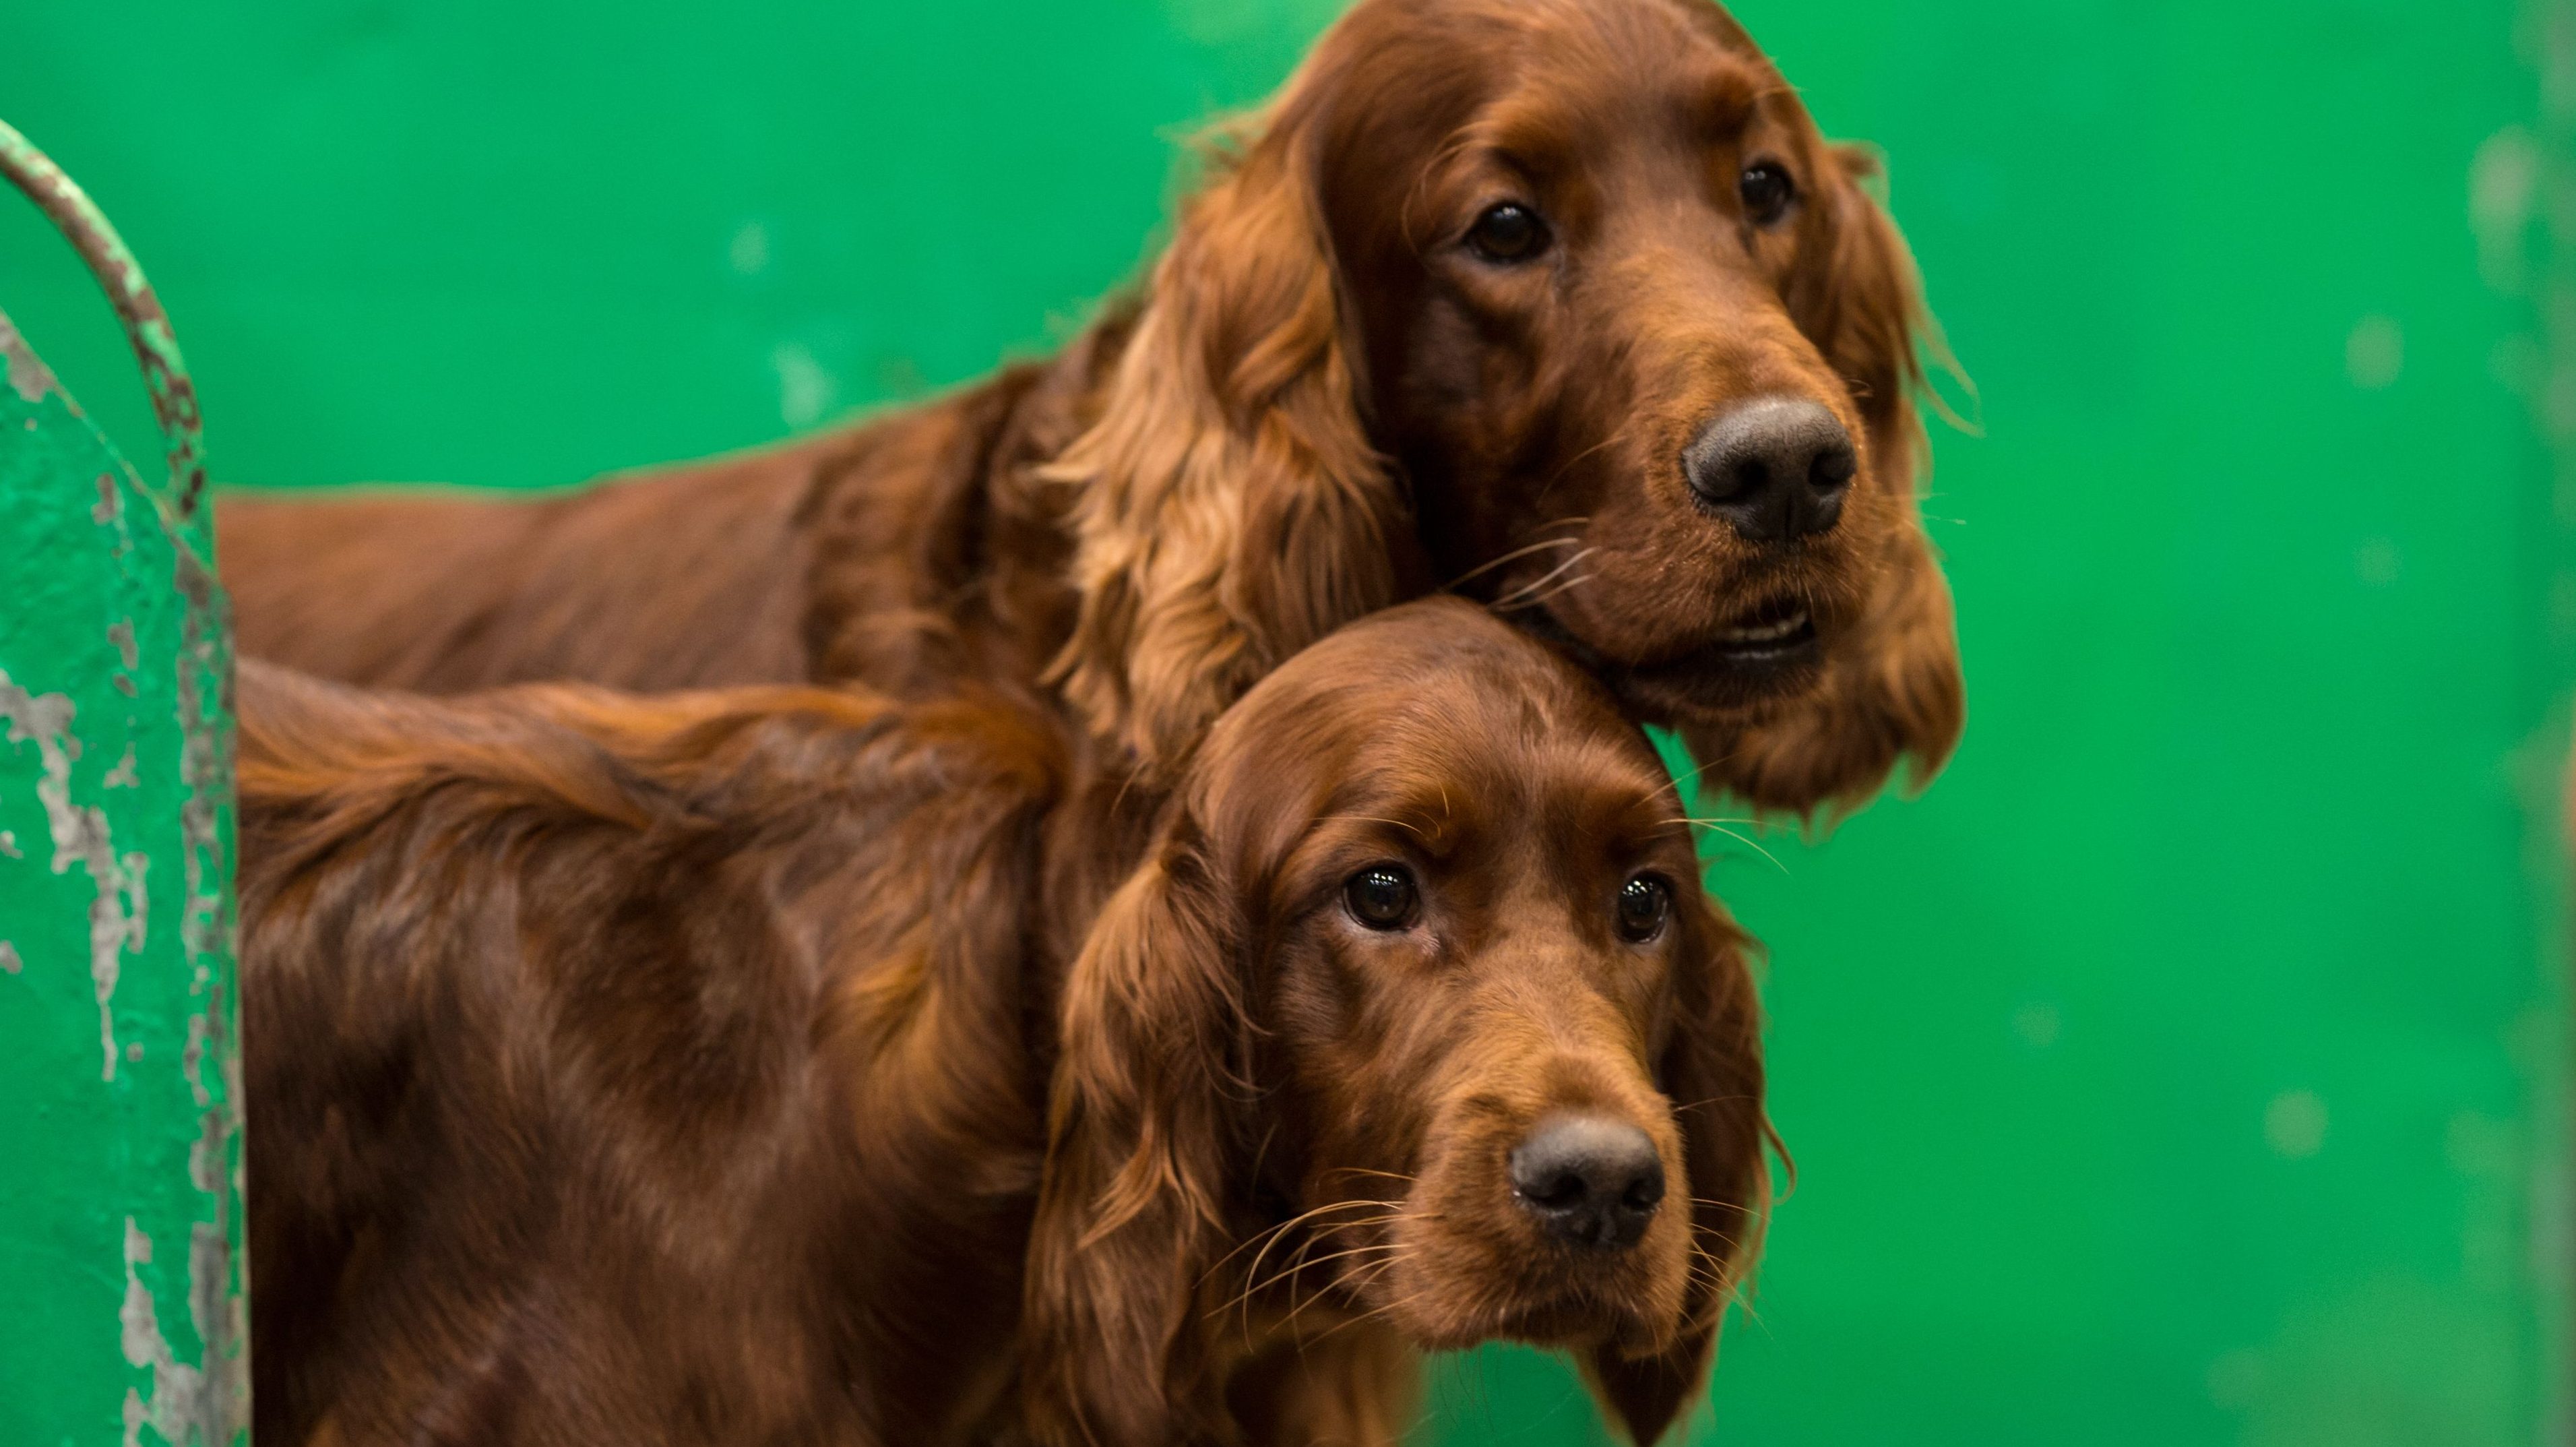 How to Watch National Dog Show 2018 Online Without Cable